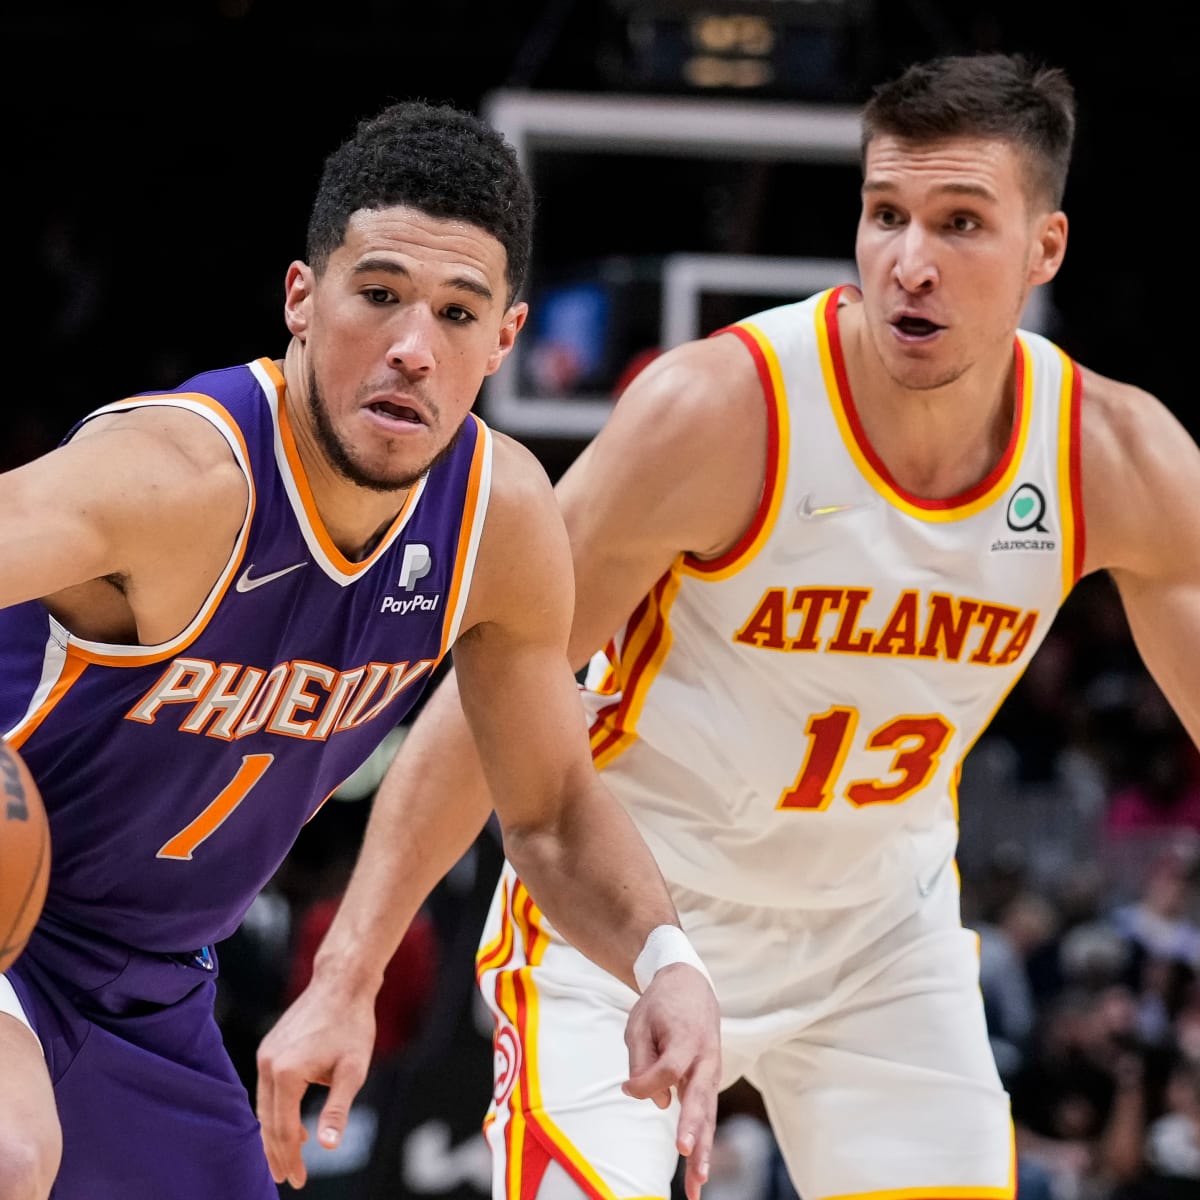 Game Preview: Suns (31-14) come home to face Hawks (23-23